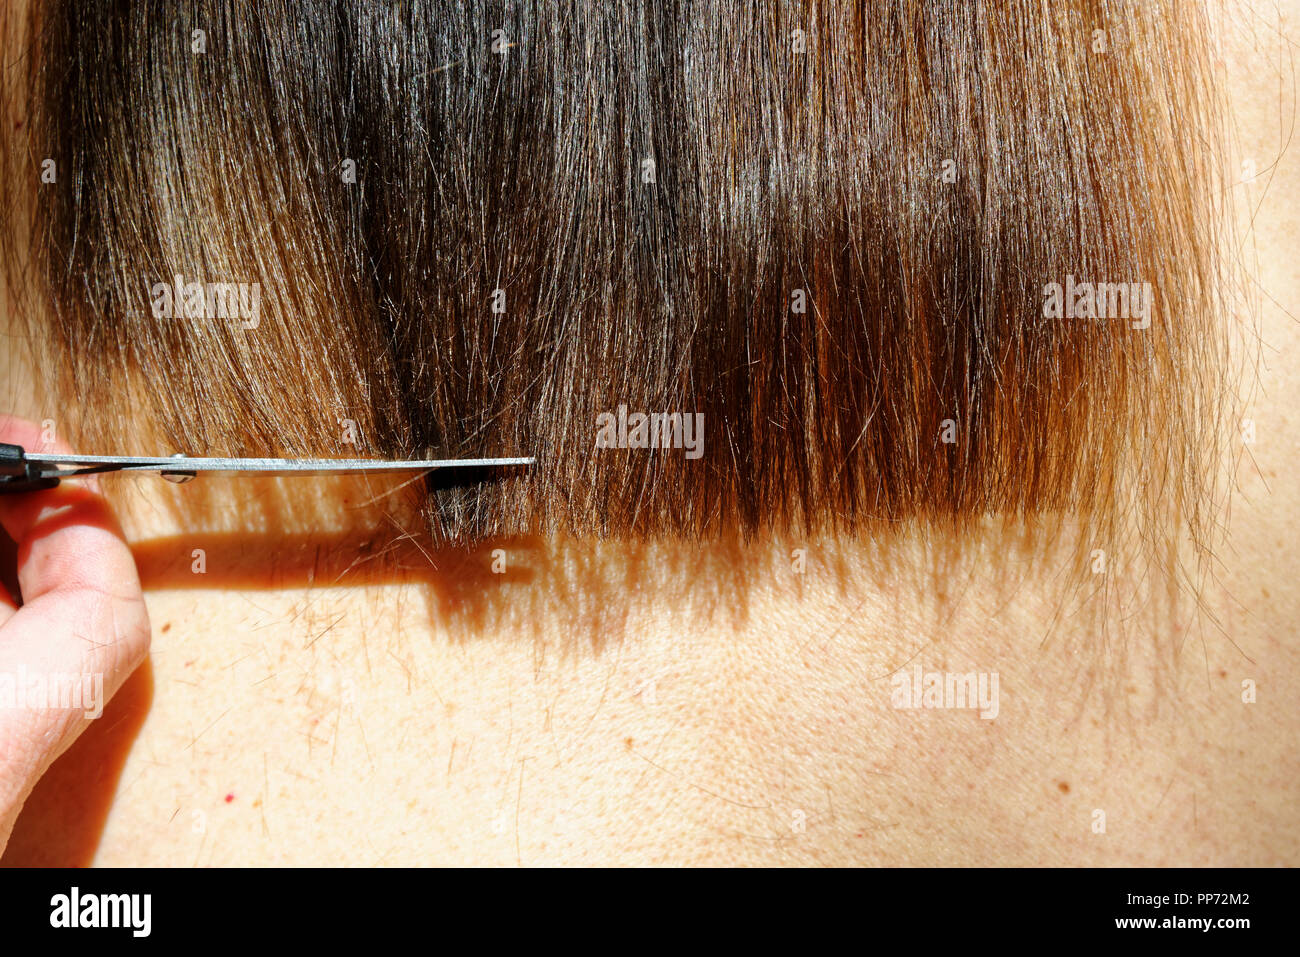 A hair cut showing just the tips of the scissors Stock Photo